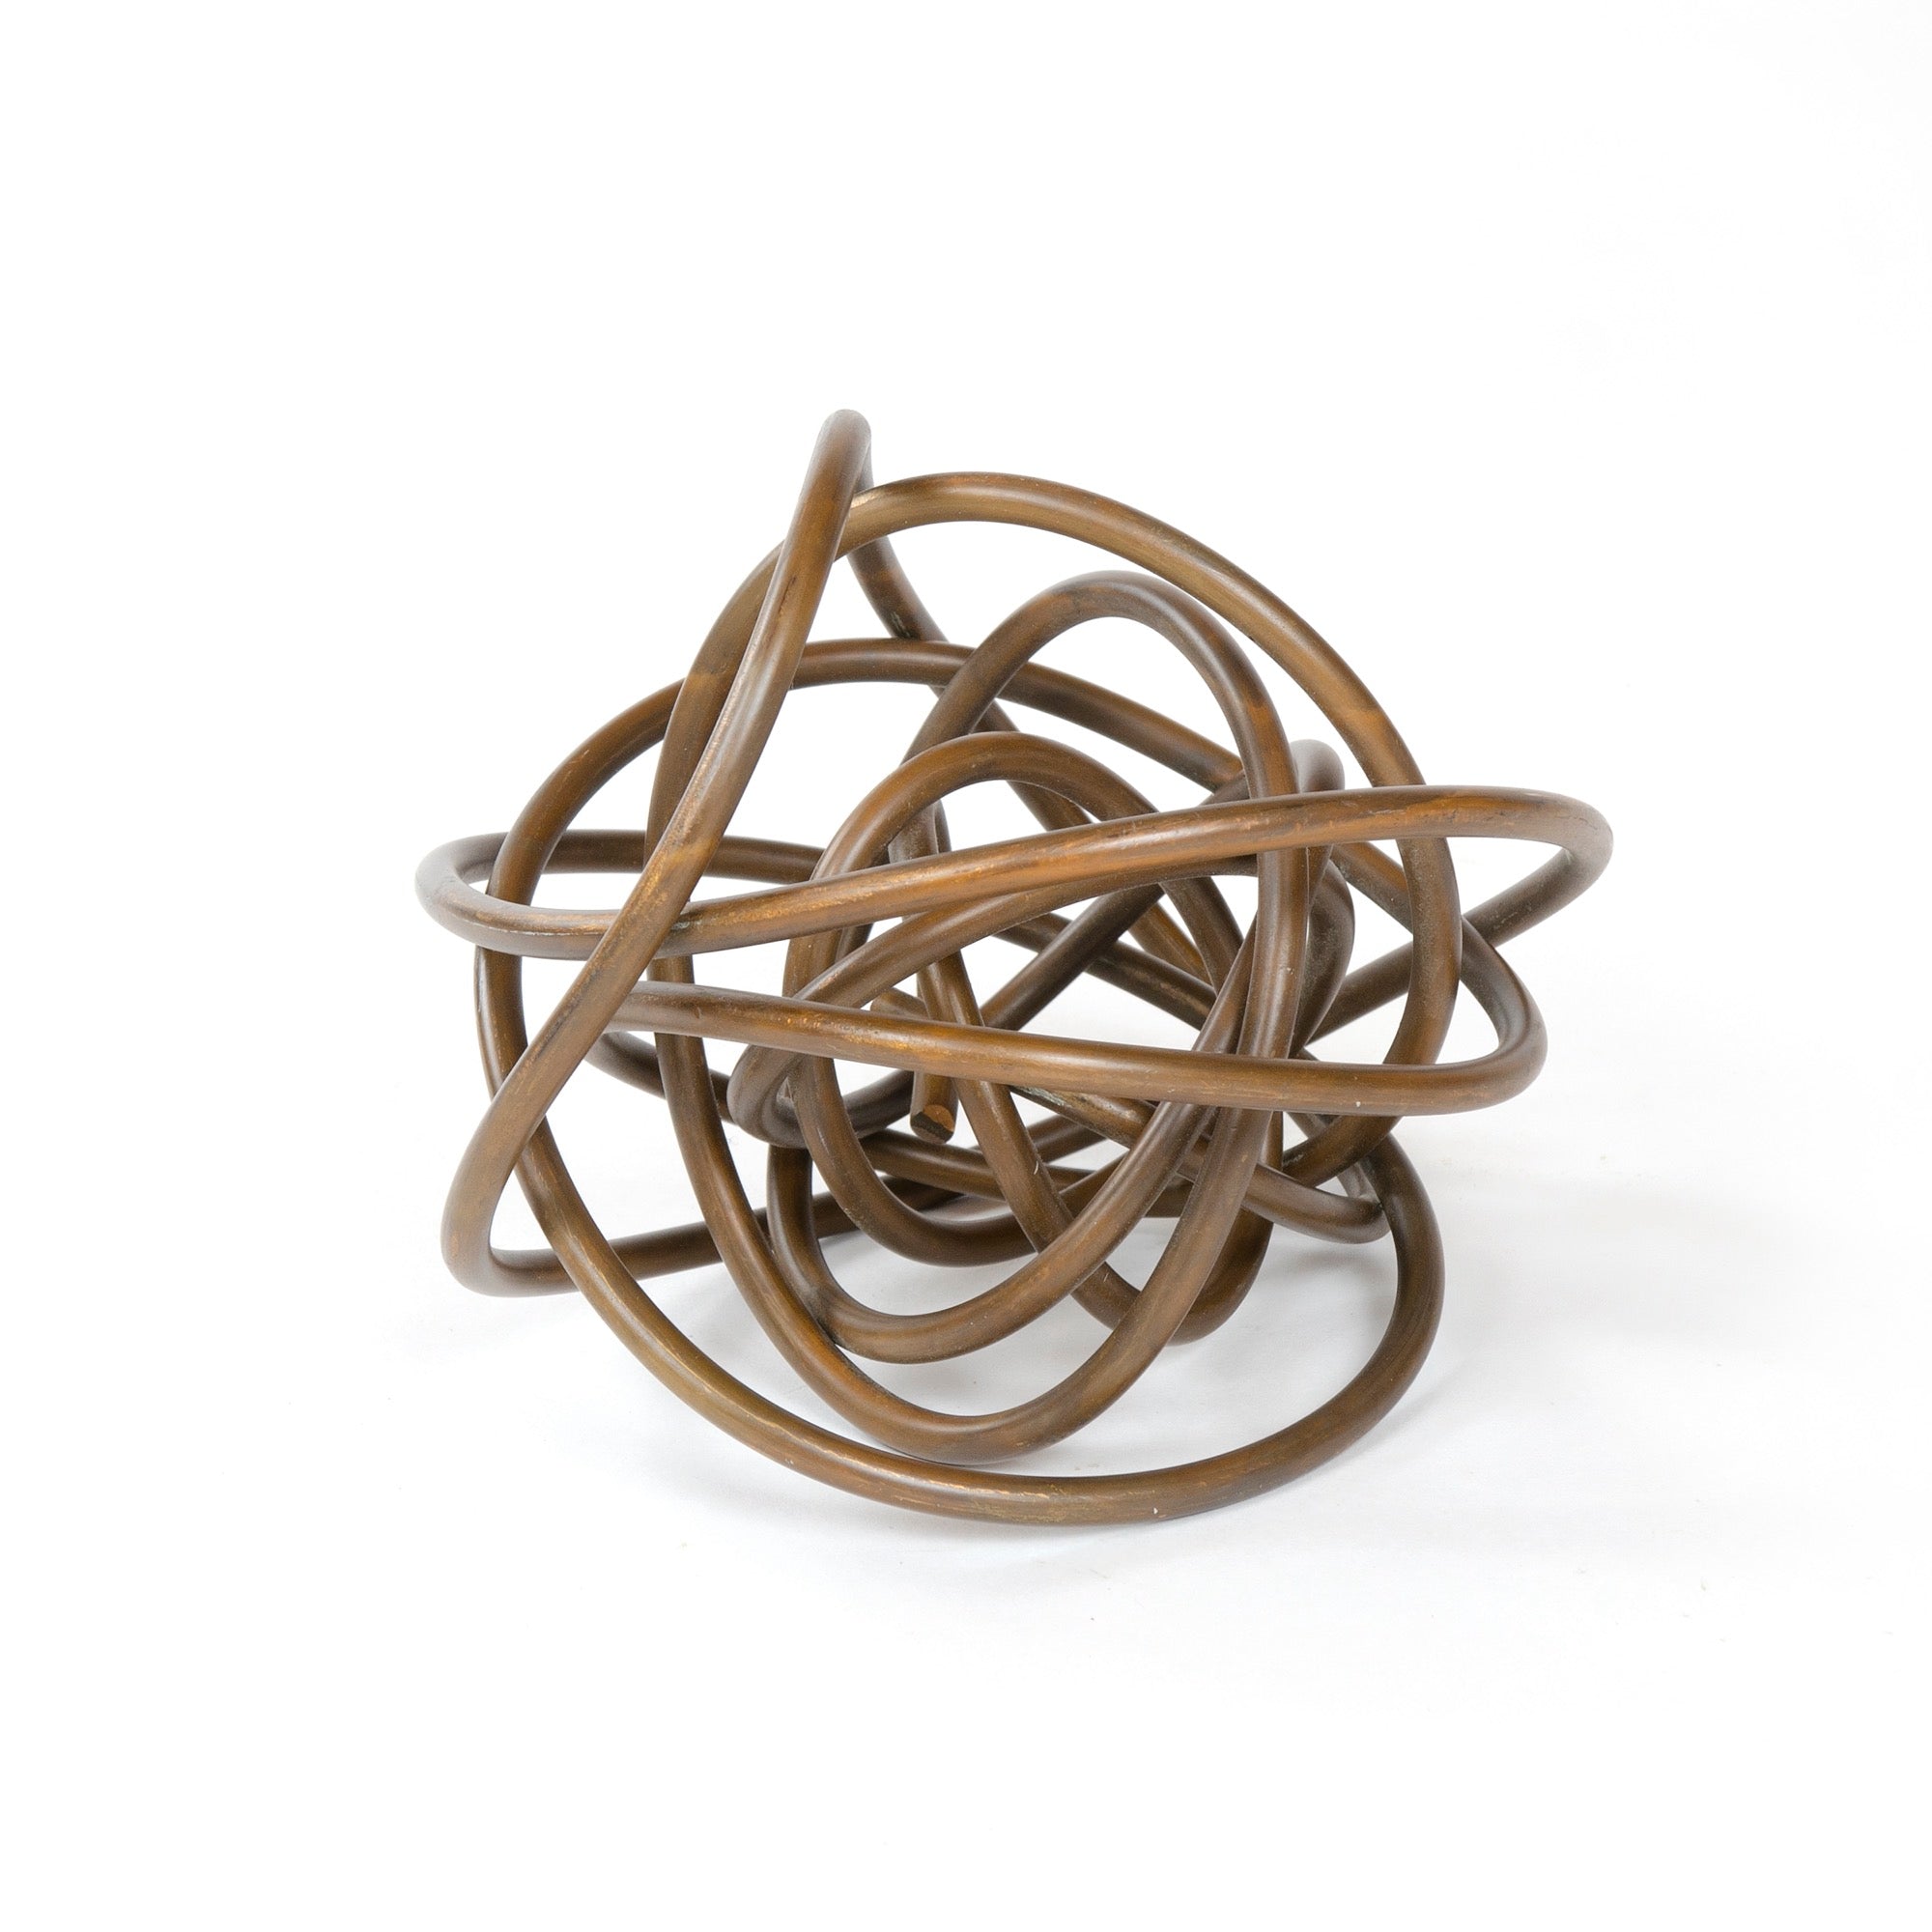 Sculpture of Intertwined Copper Rod